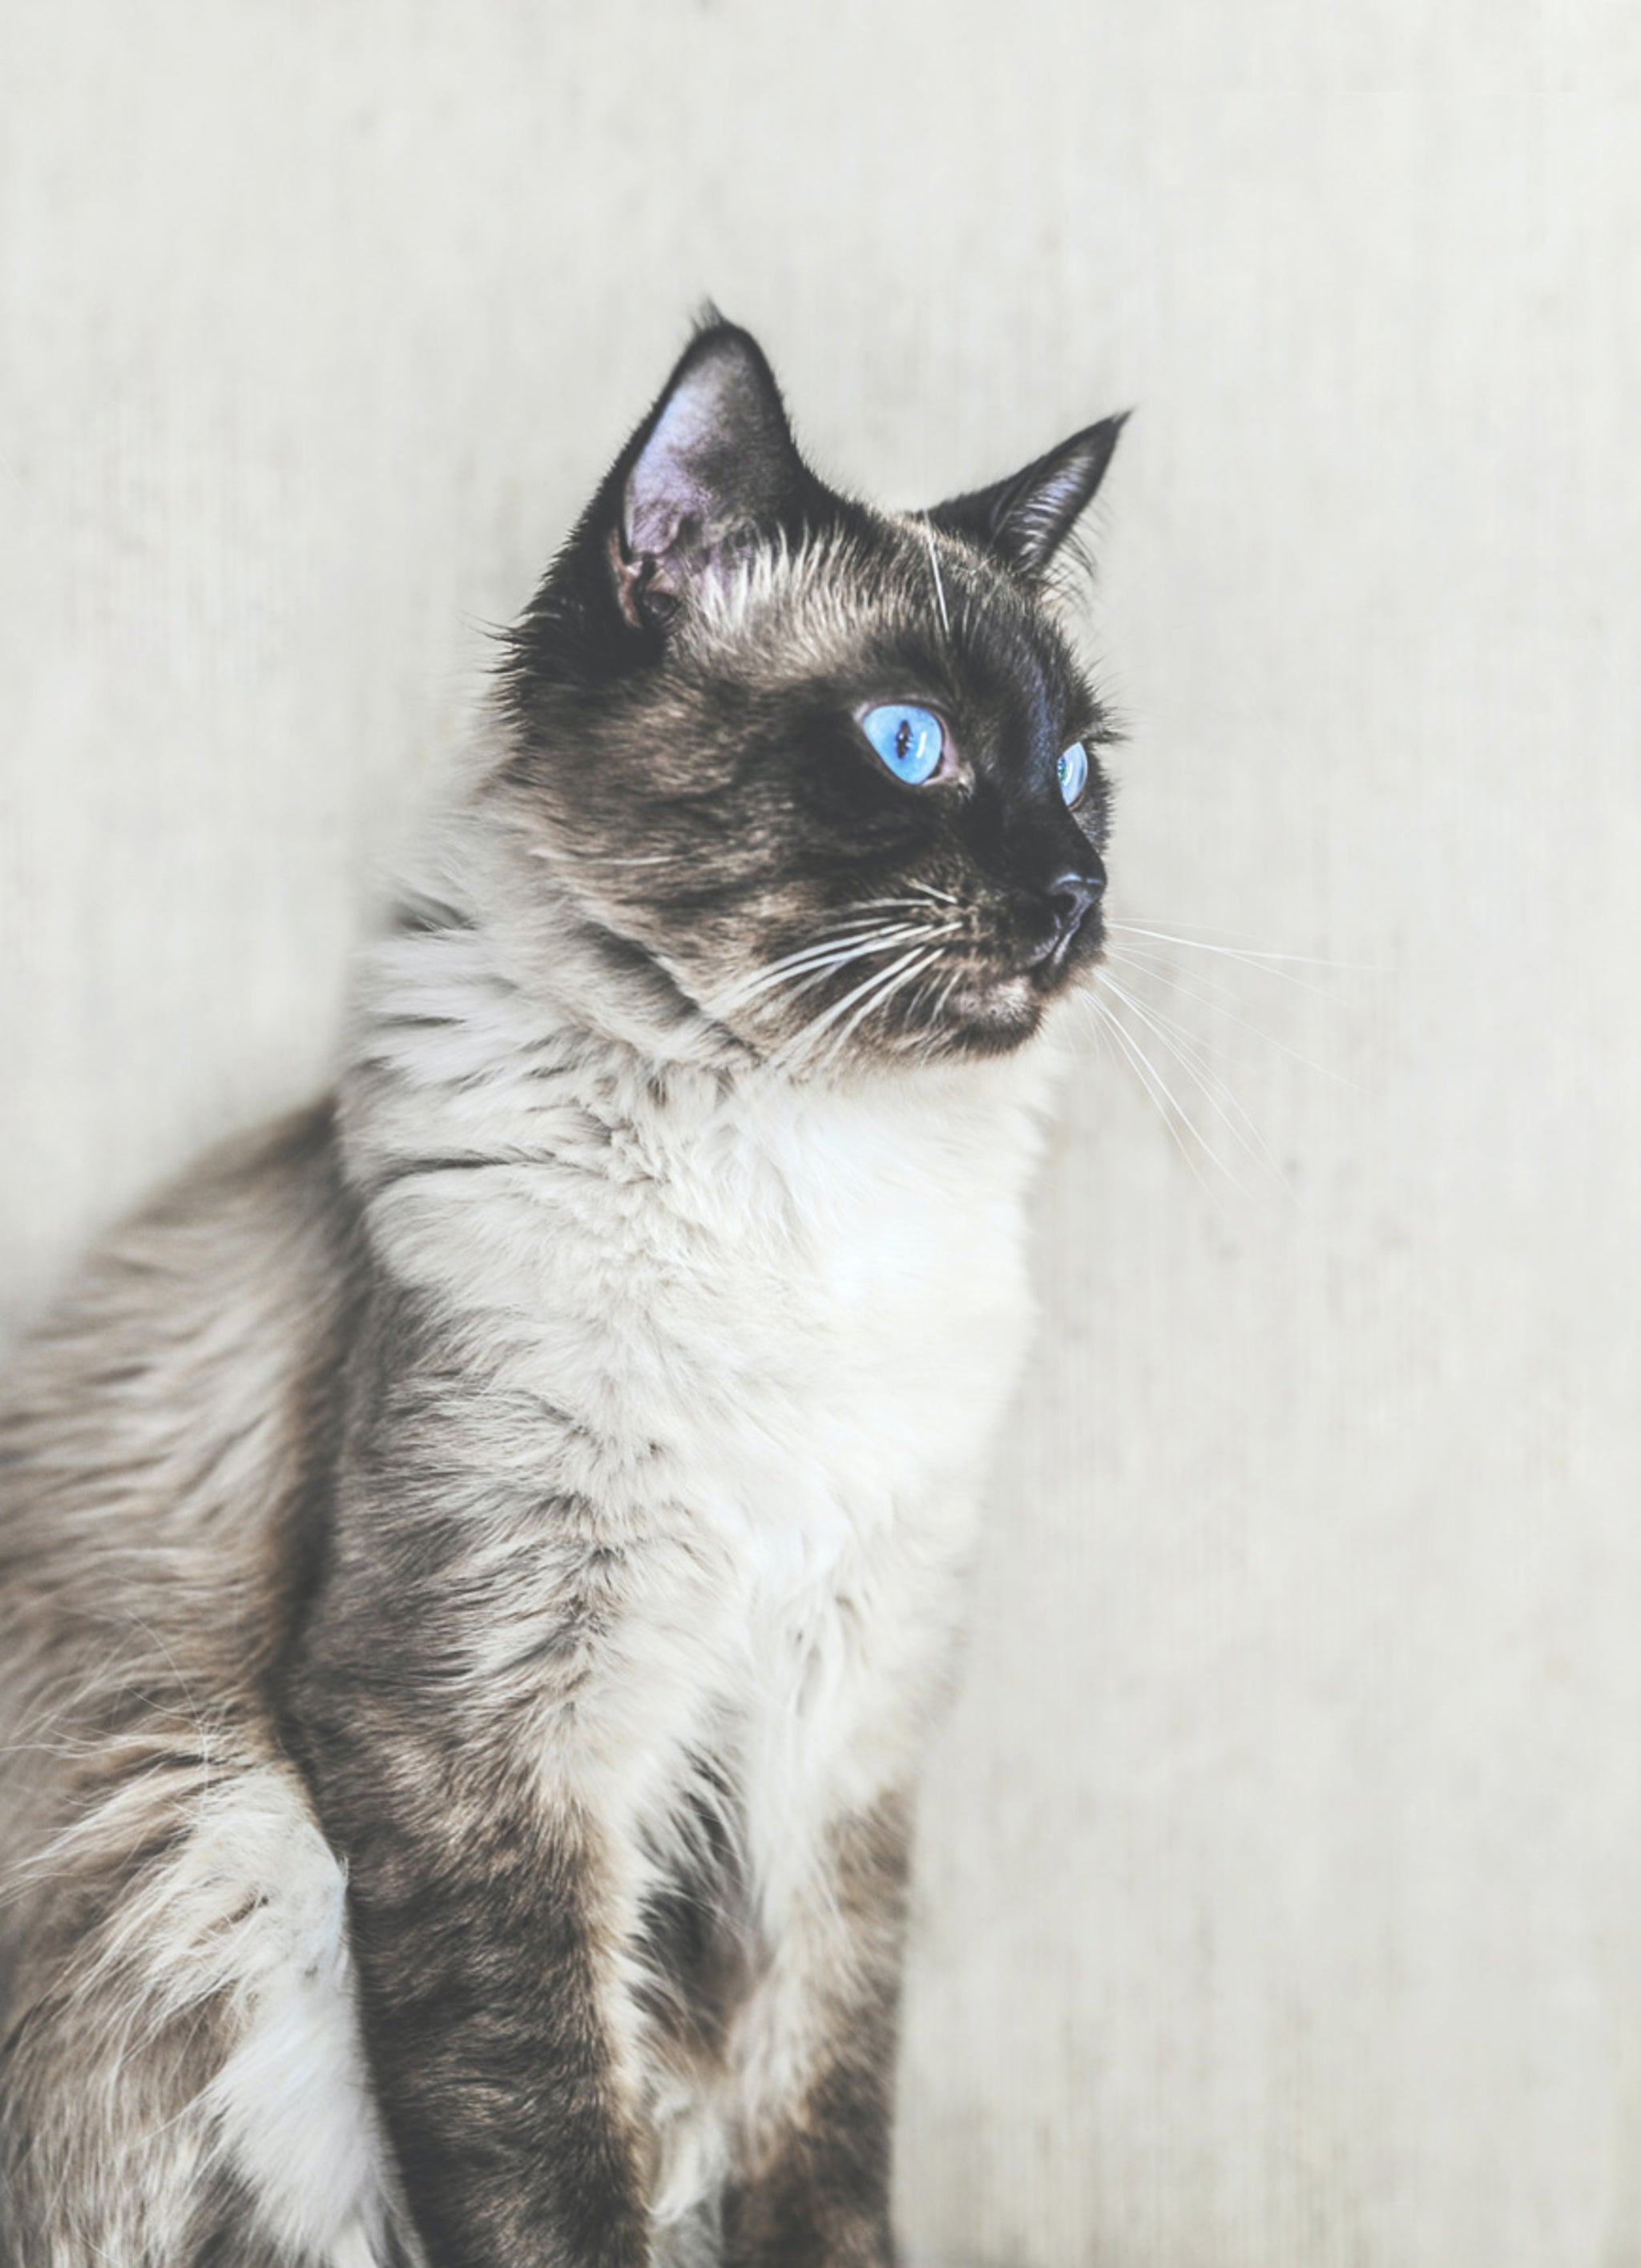 Balinese cats have longer hair, but have less allergy-inducing protein in their saliva.